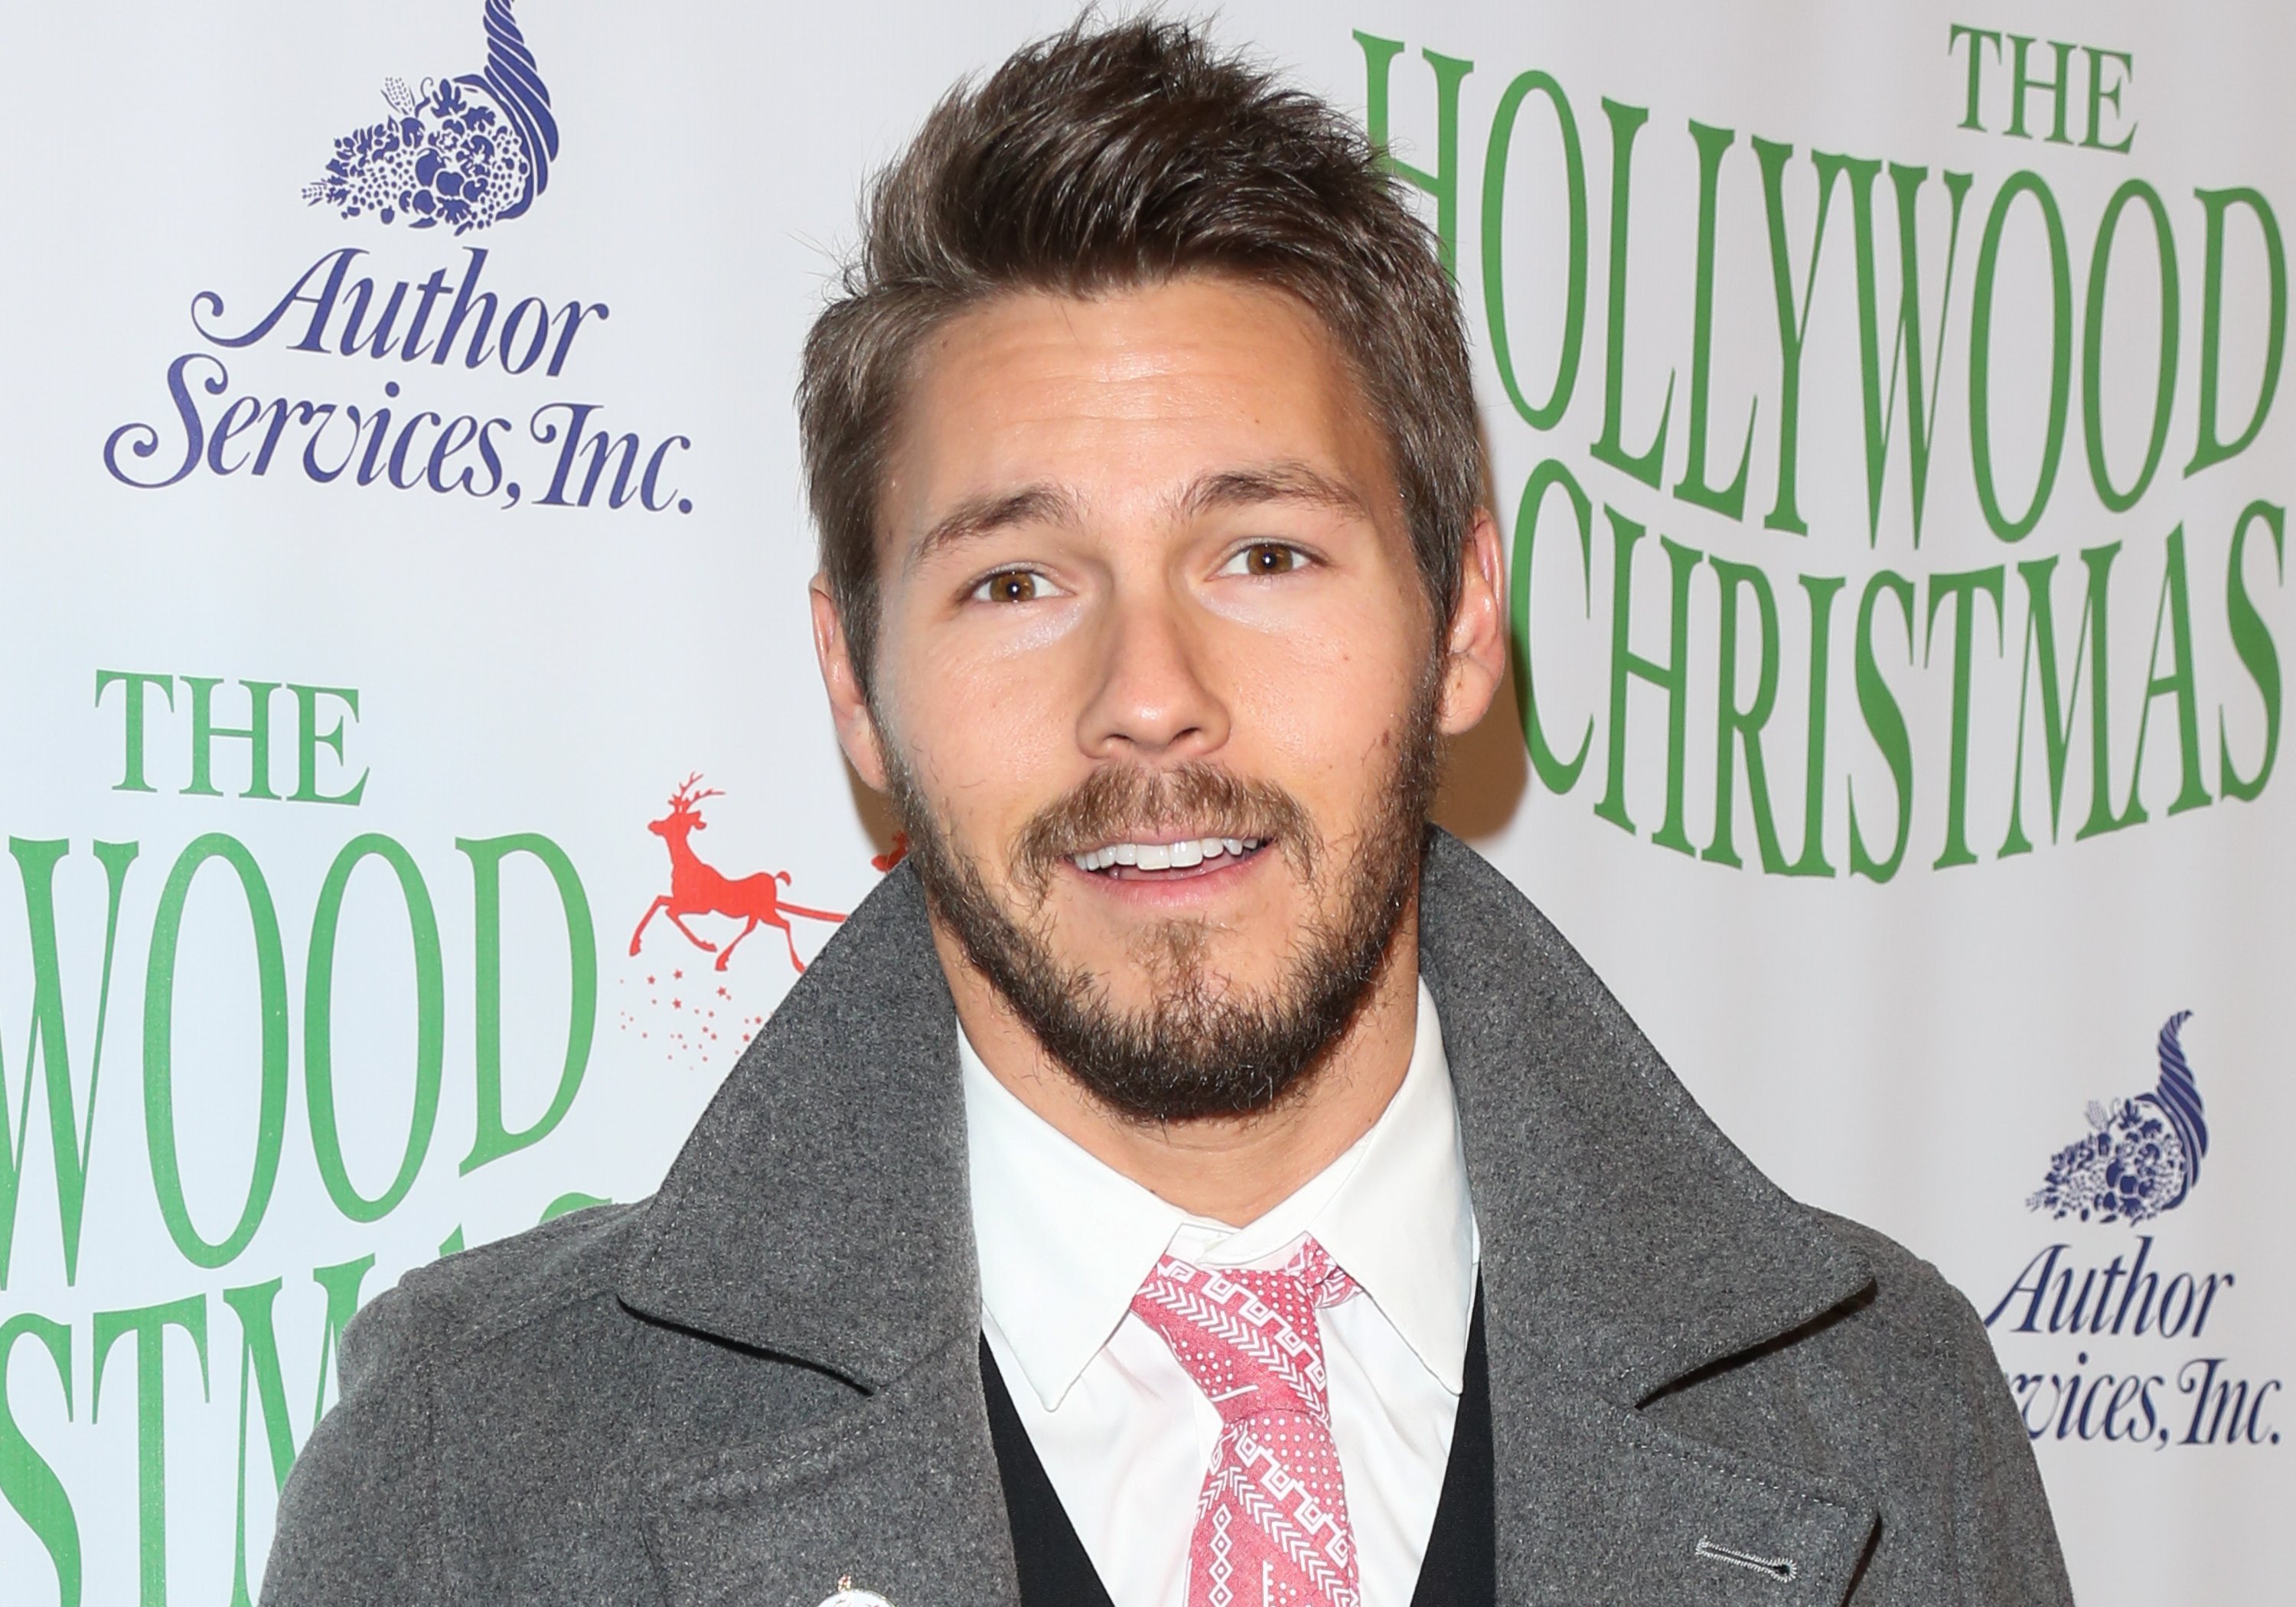 'The Bold and the Beautiful' actor Scott Clifton wearing a suite and grey jacket during a Christmas parade.